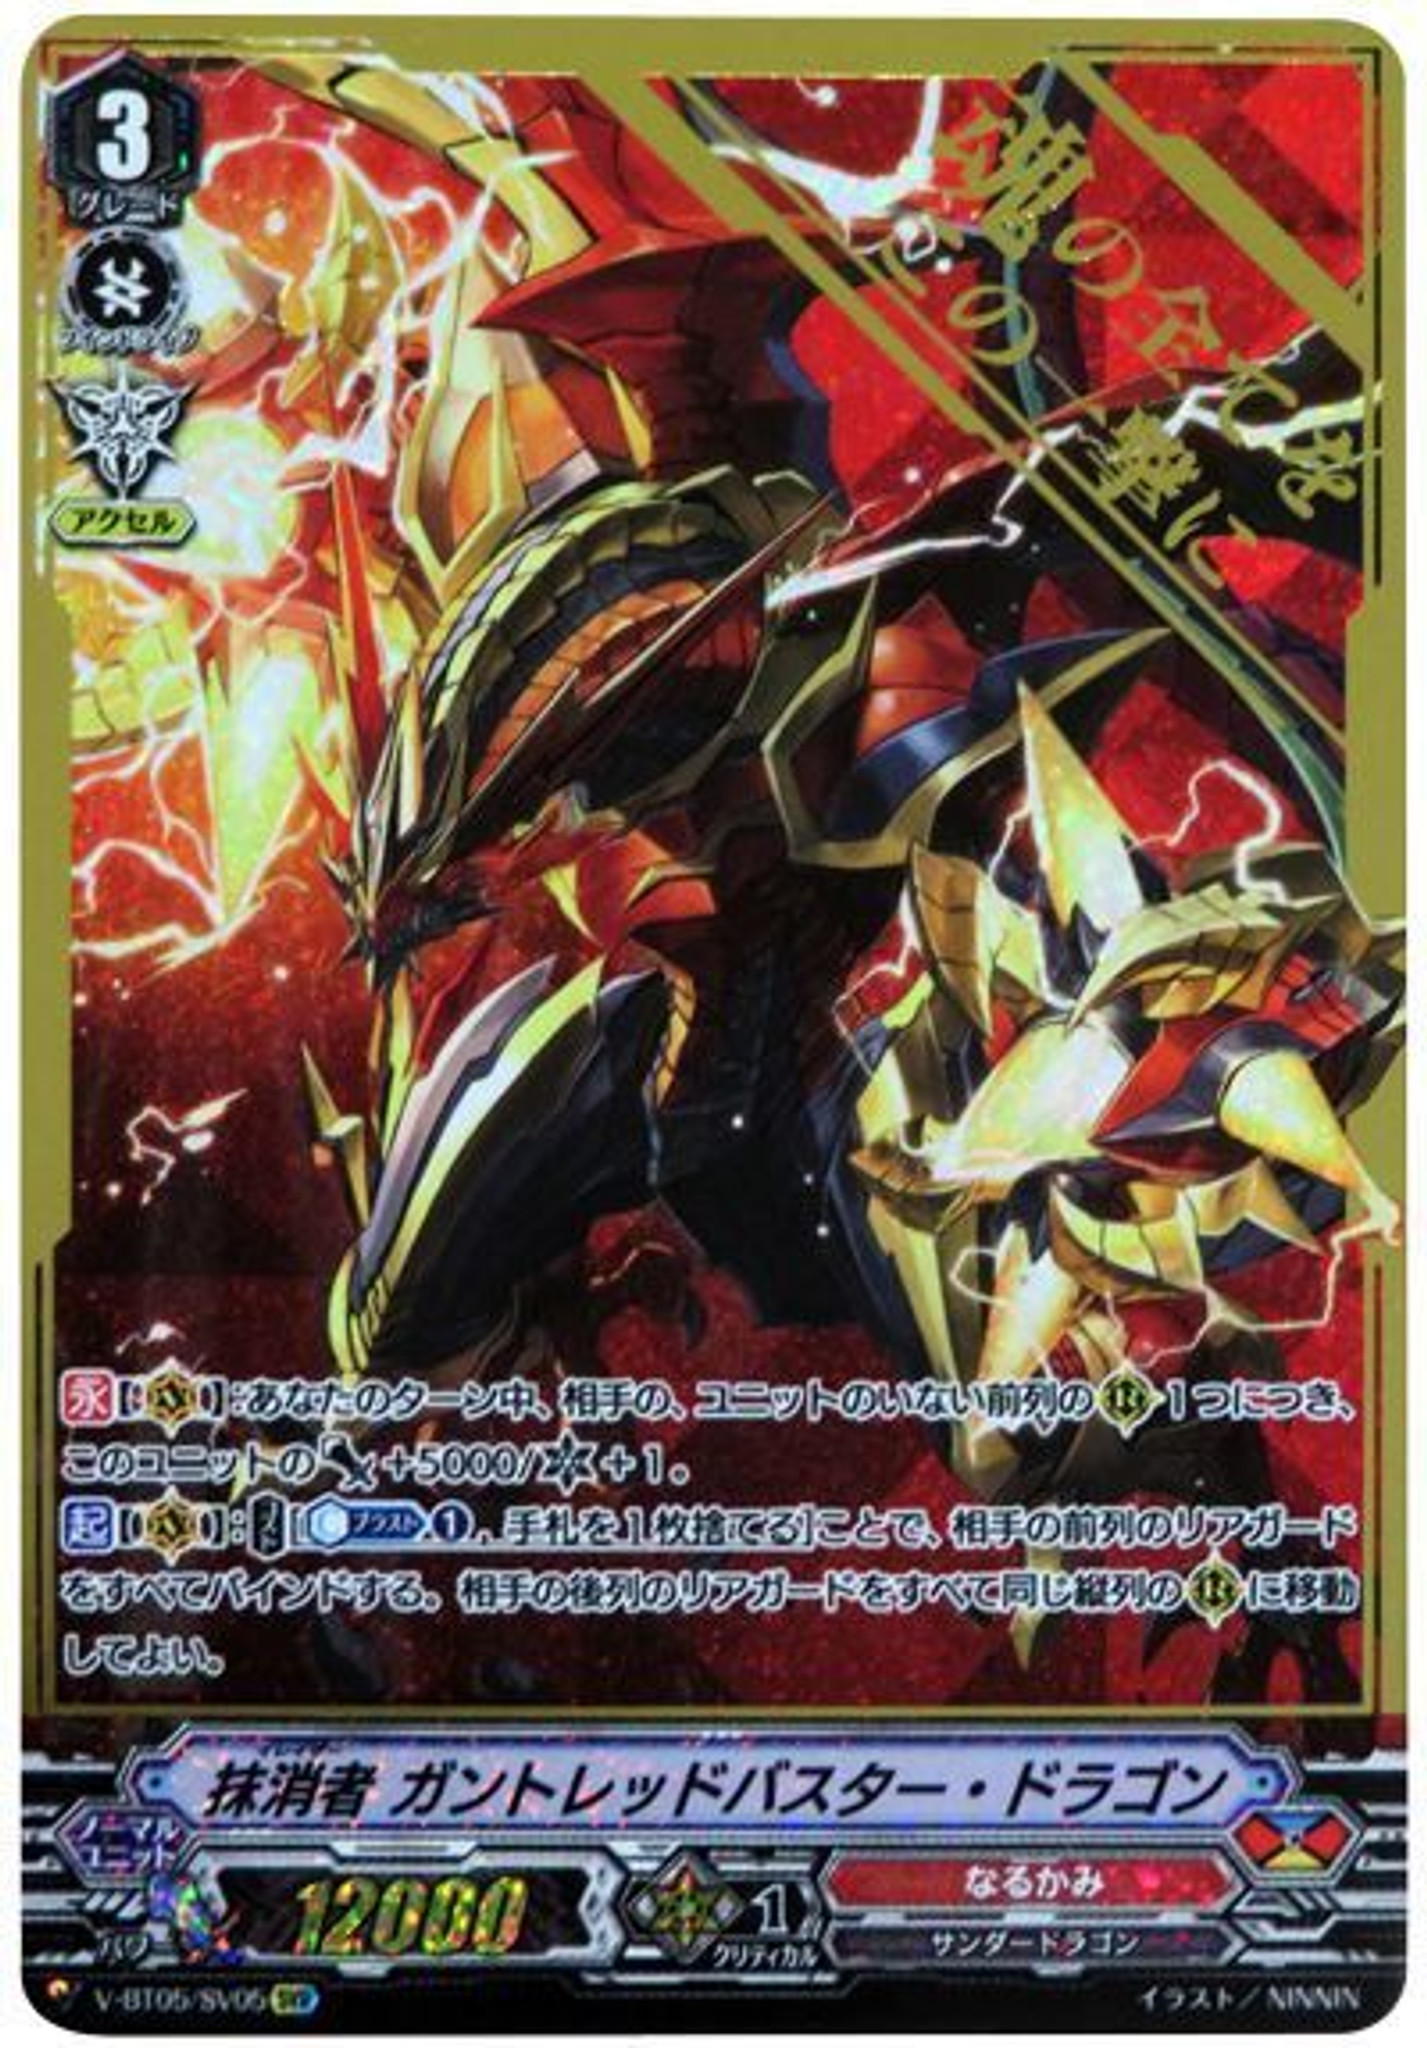 Eradicator Gauntlet Buster Dragon Aerial Steed Cardfight Vanguard Playmat New Other Ccg Items Ctluxhome Toys Hobbies